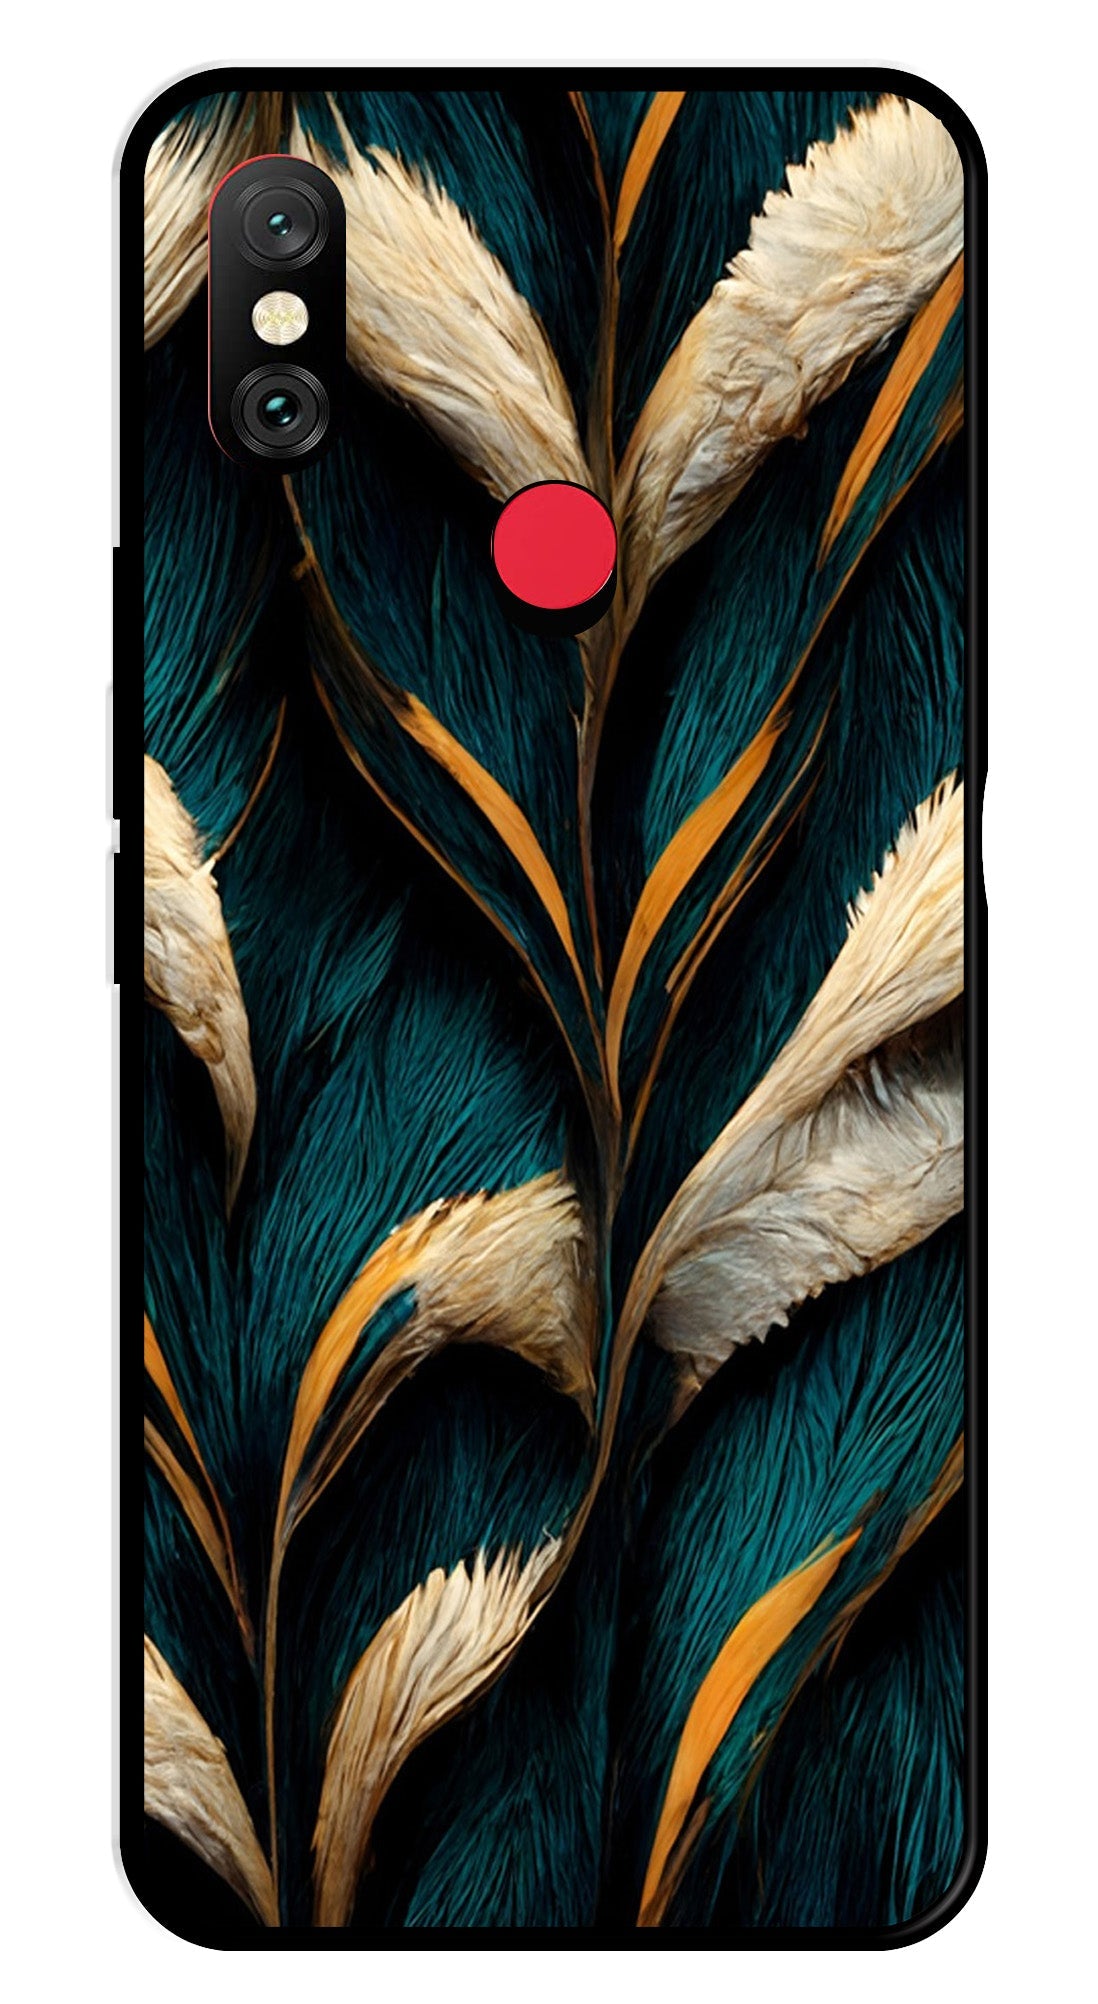 Feathers Metal Mobile Case for Redmi Note 6   (Design No -30)